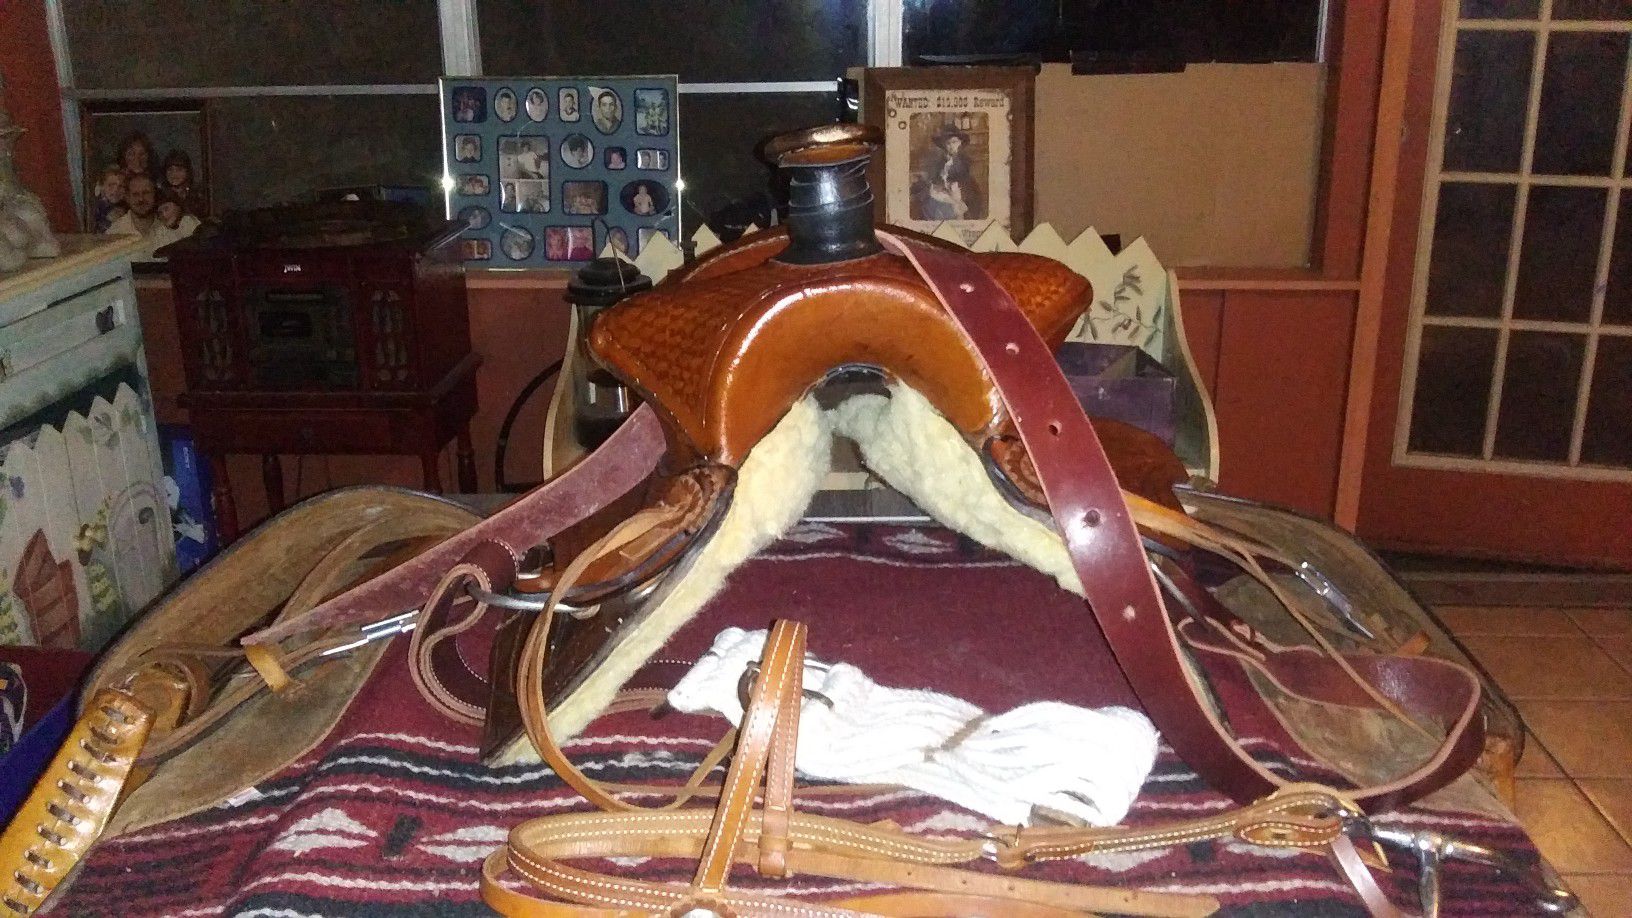 Roping saddle with blanket